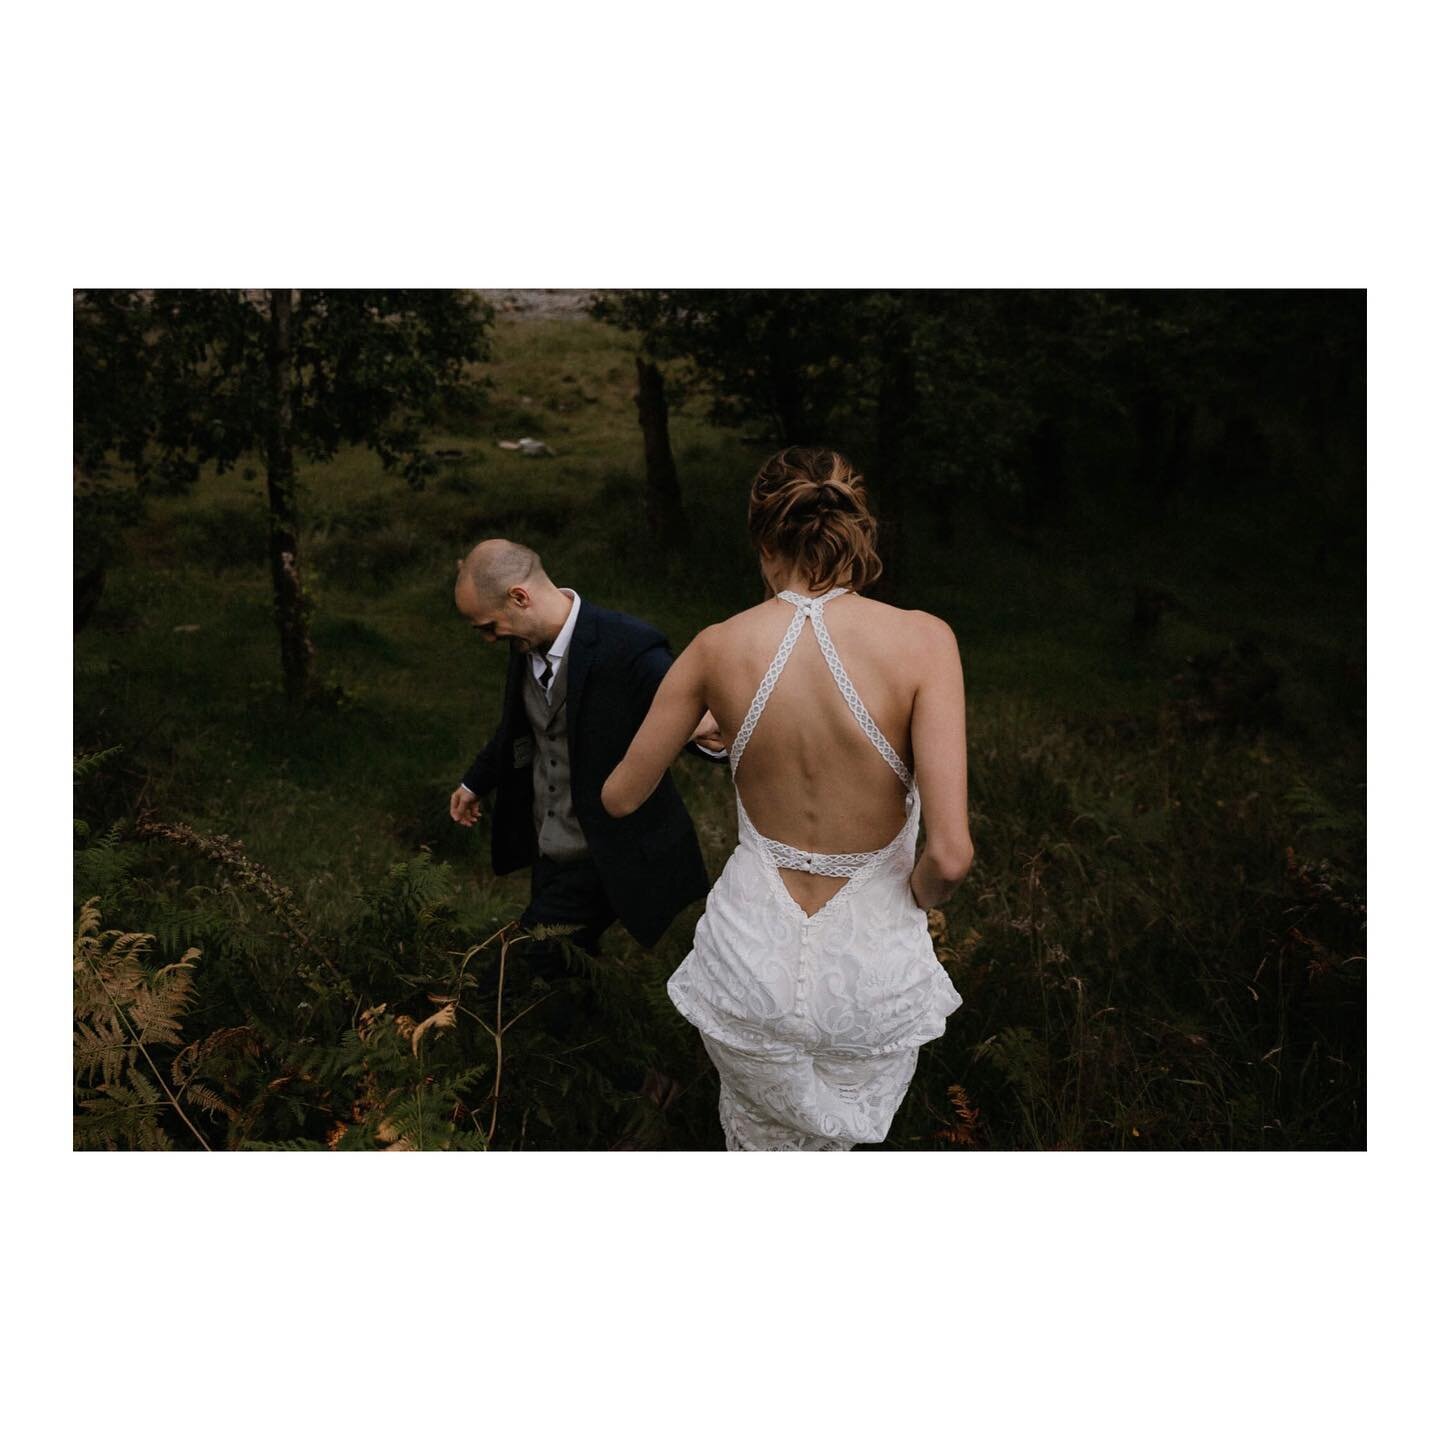 And so to elope.  The best plan B for 2020.
. .
.
.
.
#glencoe #glencoeelopement #elopementphotographer #scotland #scottishelopement #planb #sussexphotographer #worthingphotographer #outsourceediting #editing #postproduction #portrait #covidwedding #